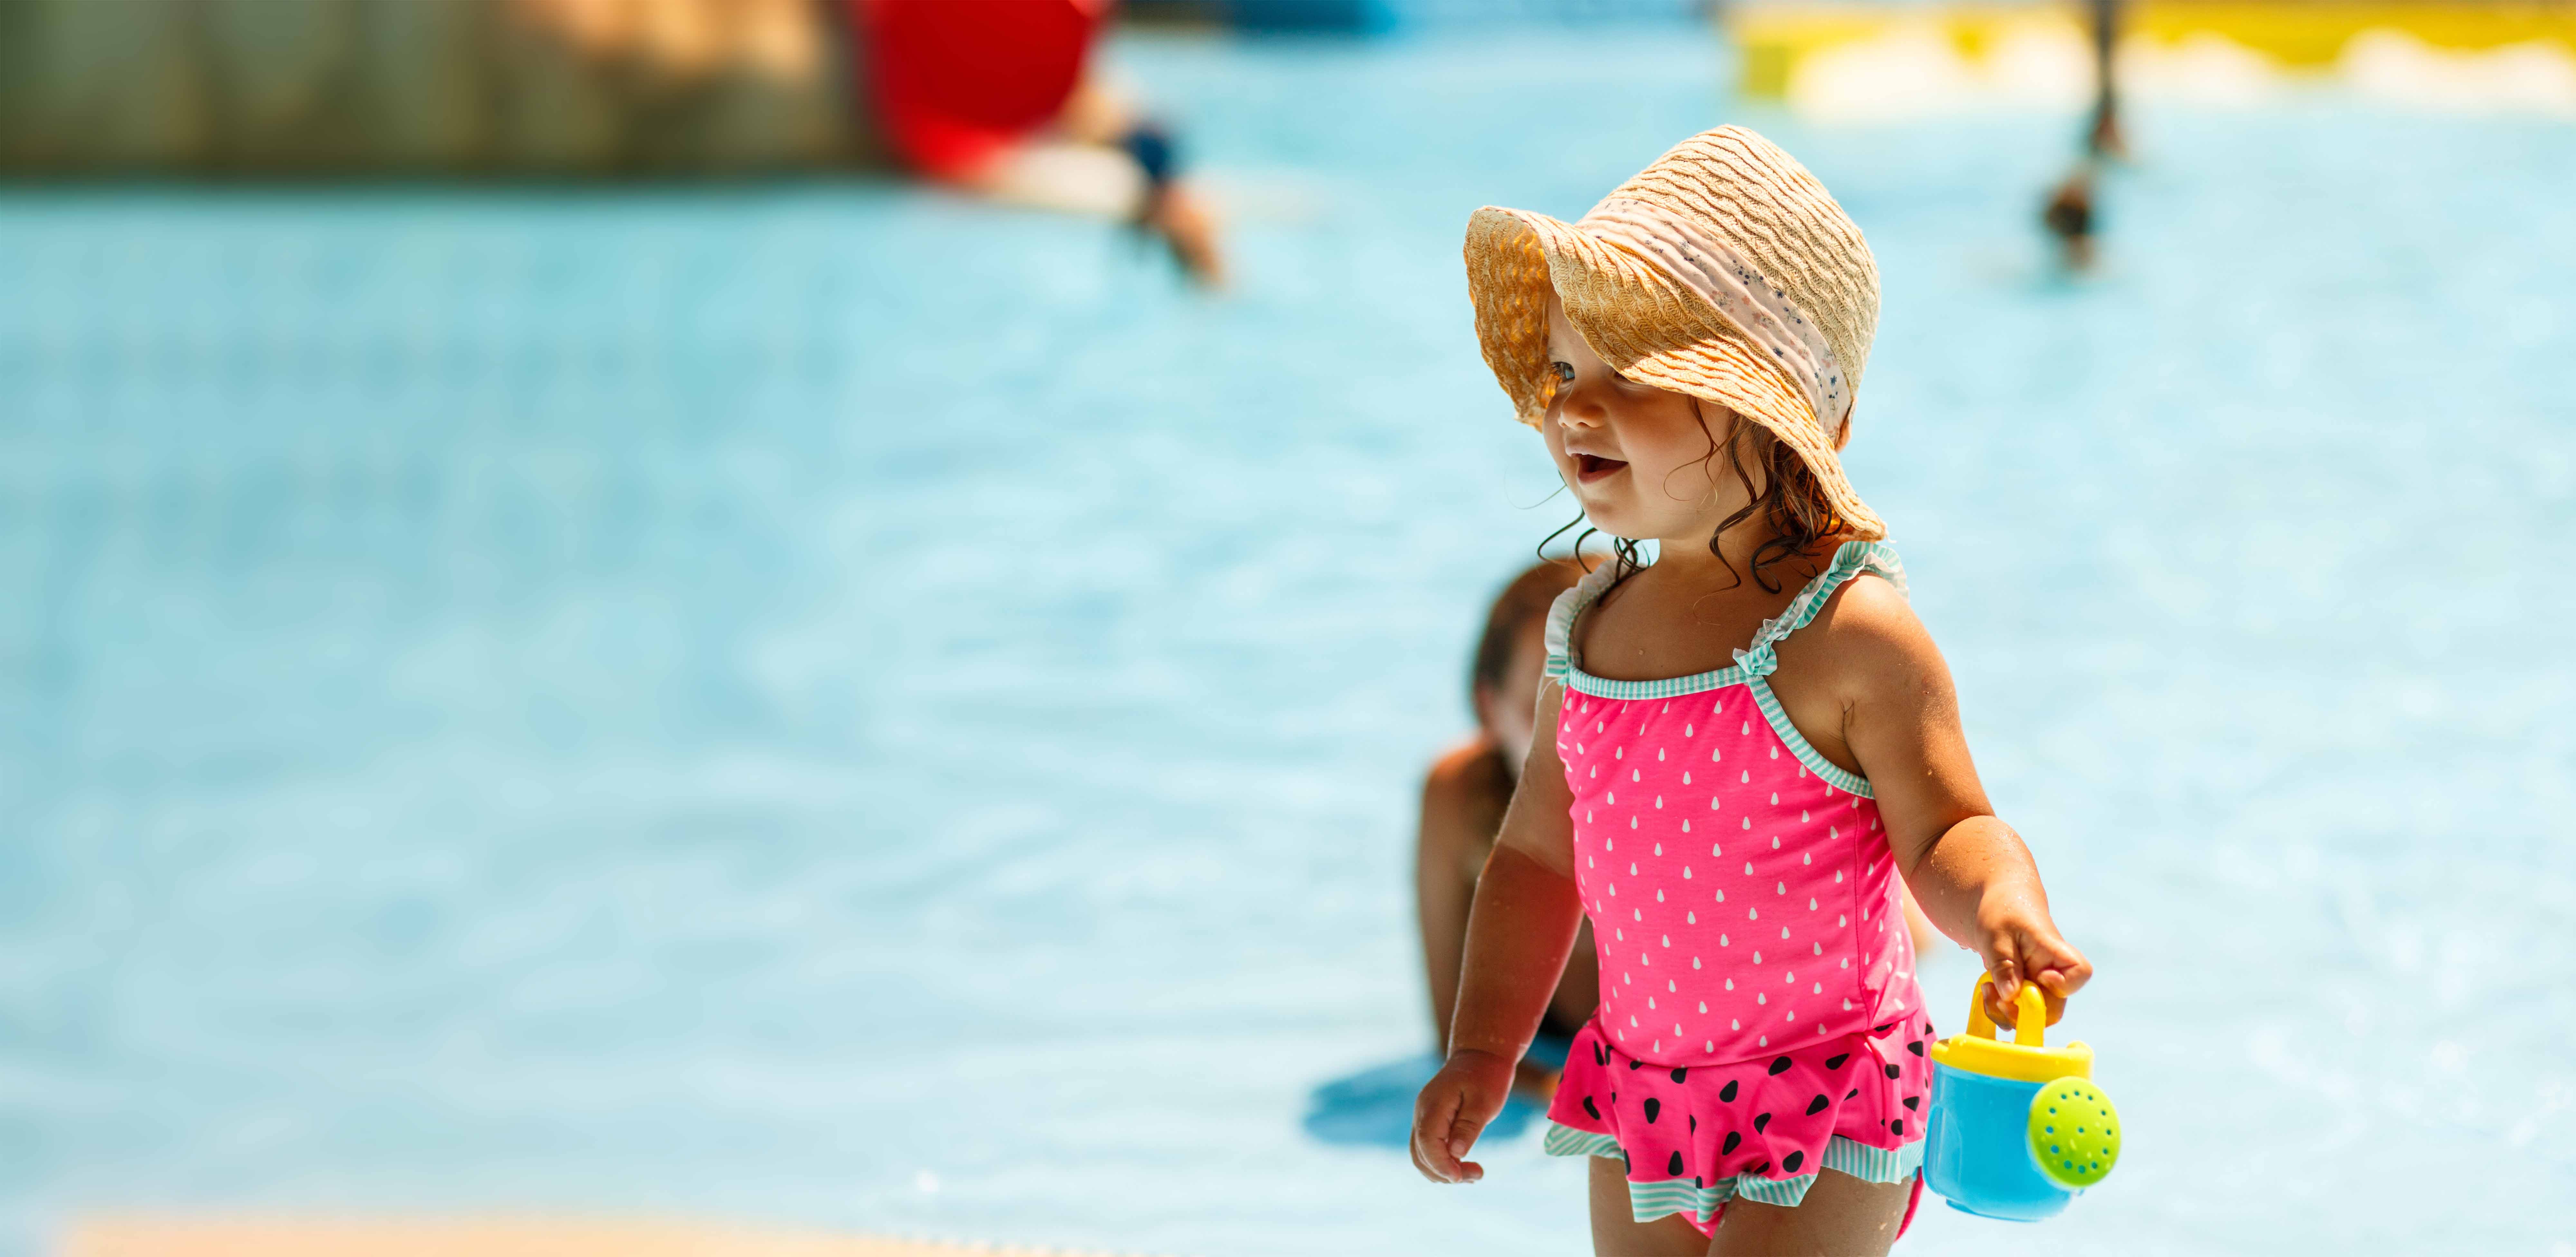 Toddler child wearing swimming suit and playing in clean swimming pool